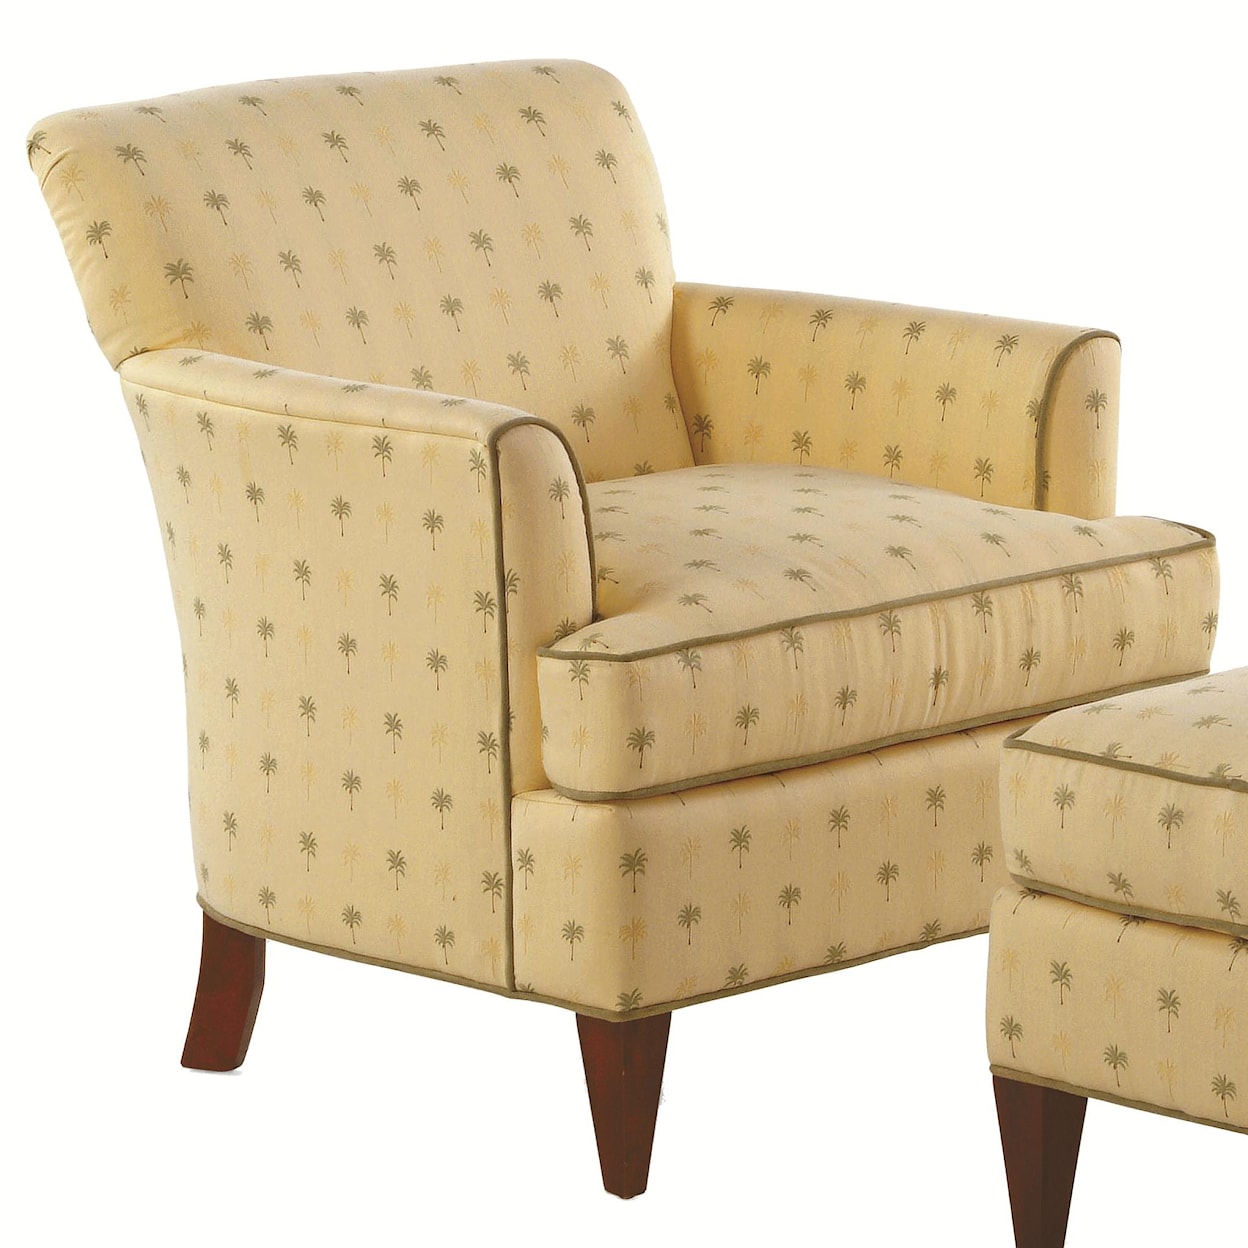 Braxton Culler Accent Chairs Tuscany Upholstered Chair